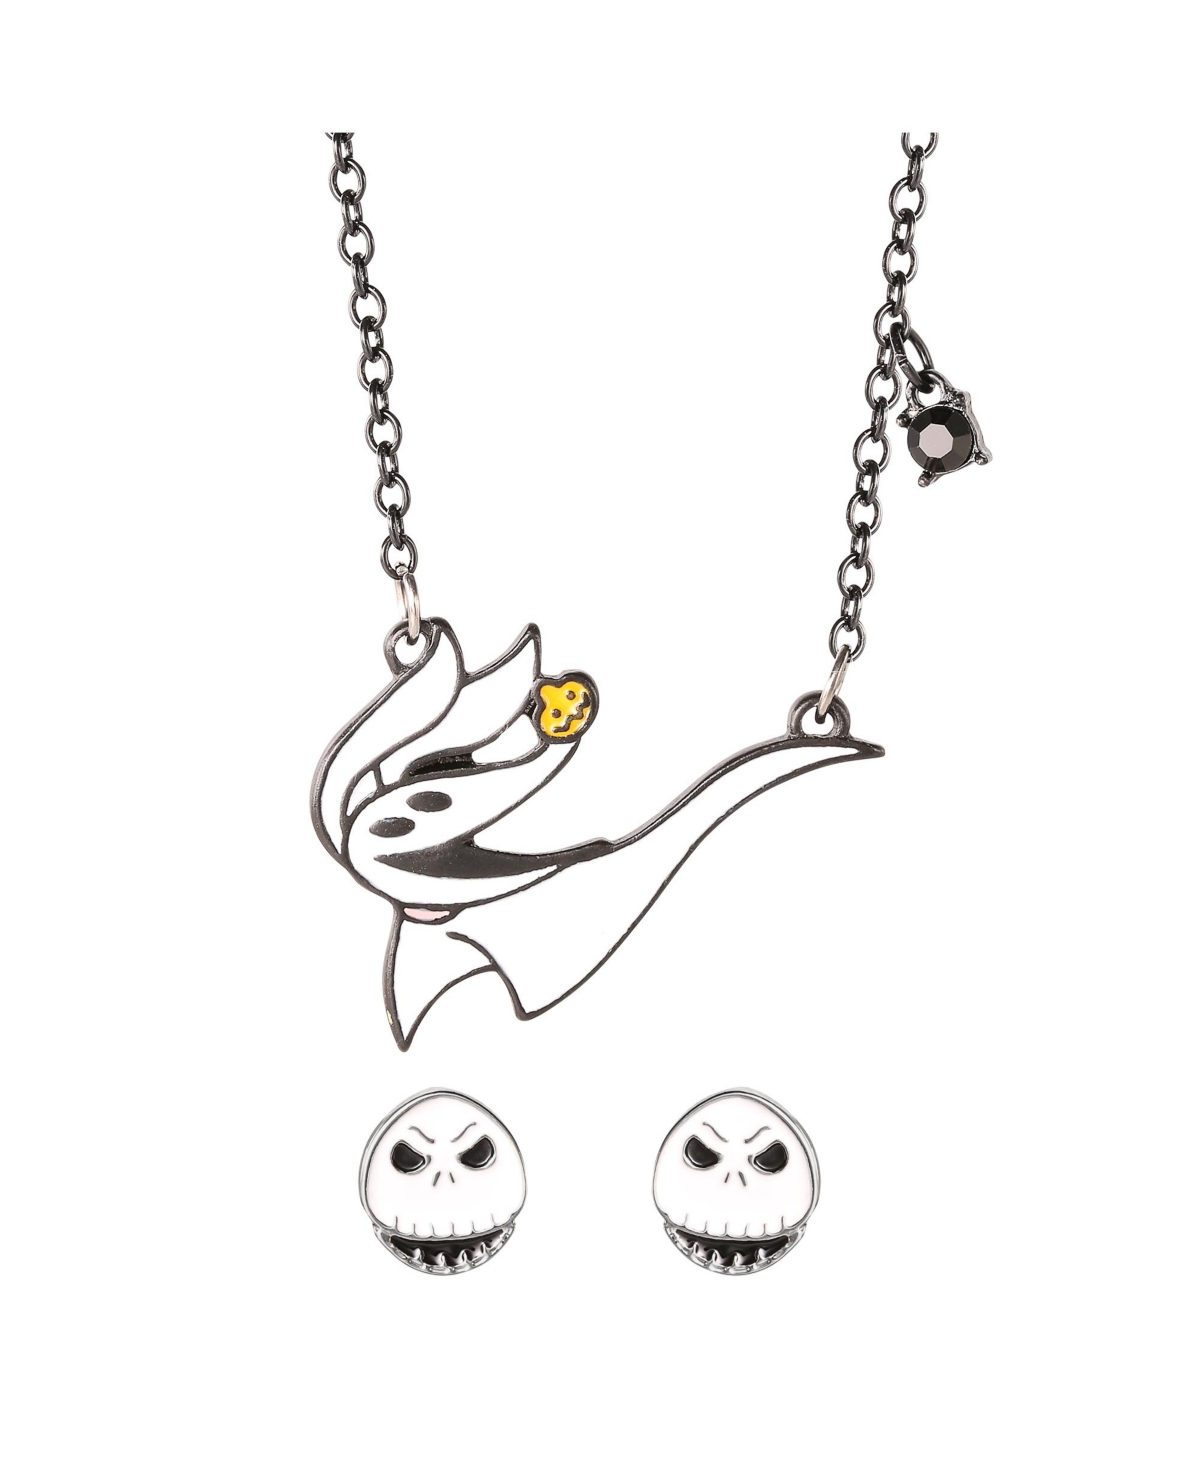 The Nightmare Before Christmas Women's Costume Necklace and Earrings Set - Zero Necklace and Jack Studs - Black, white